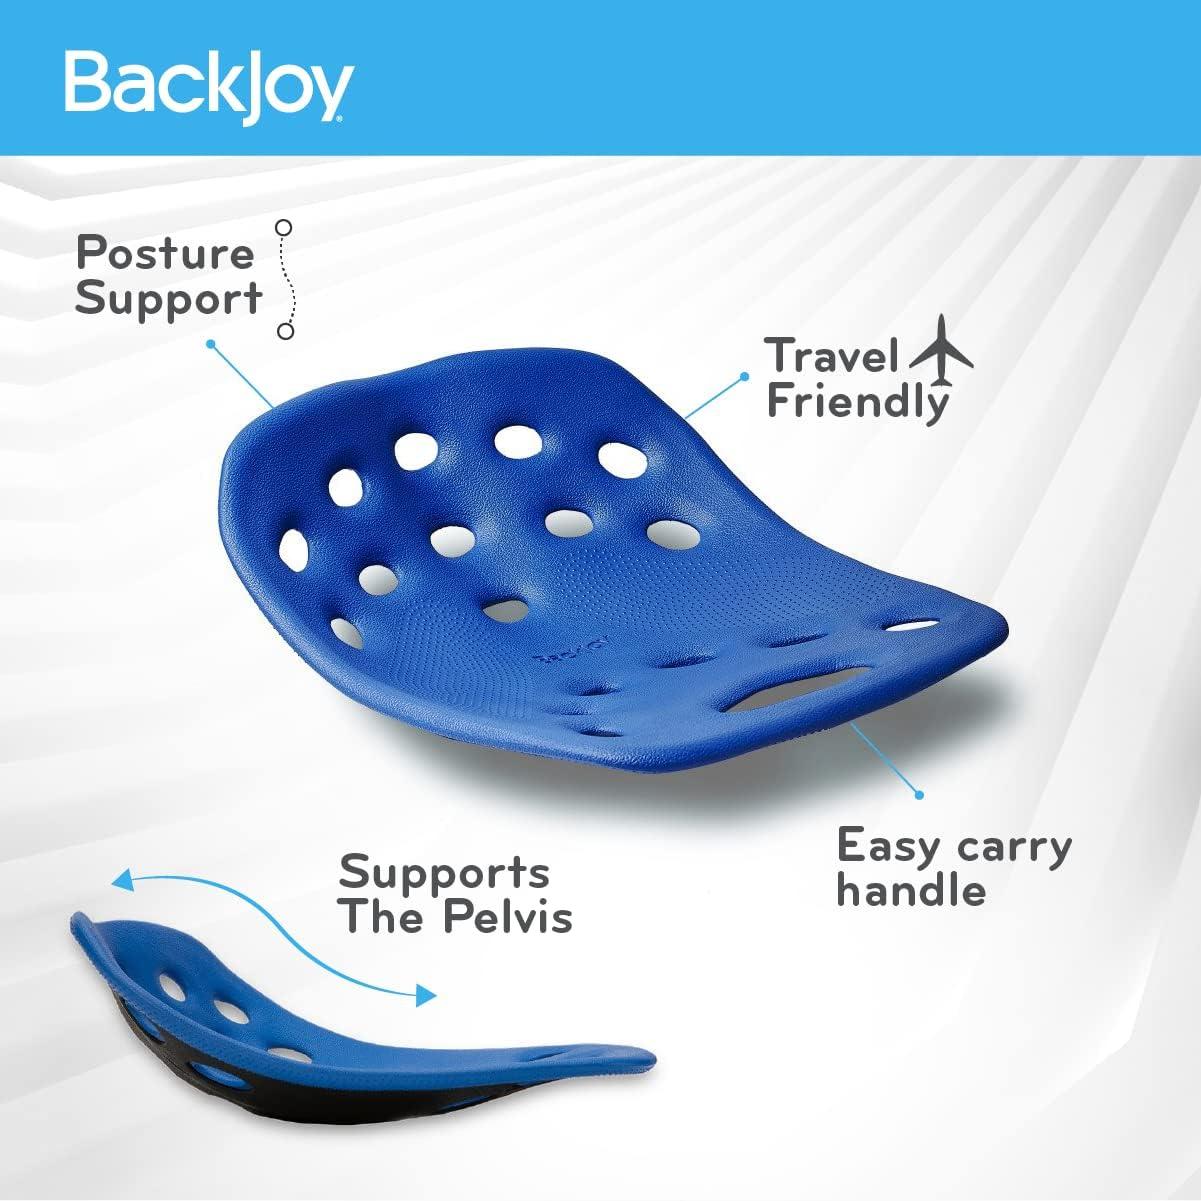 BackJoy Posture Seat Pad | Ergonomic Pressure Relief, Hip & Pelvic Support  to Improve Posture | Home, Office Chair, Car Seat, Waterproof | Fits SL